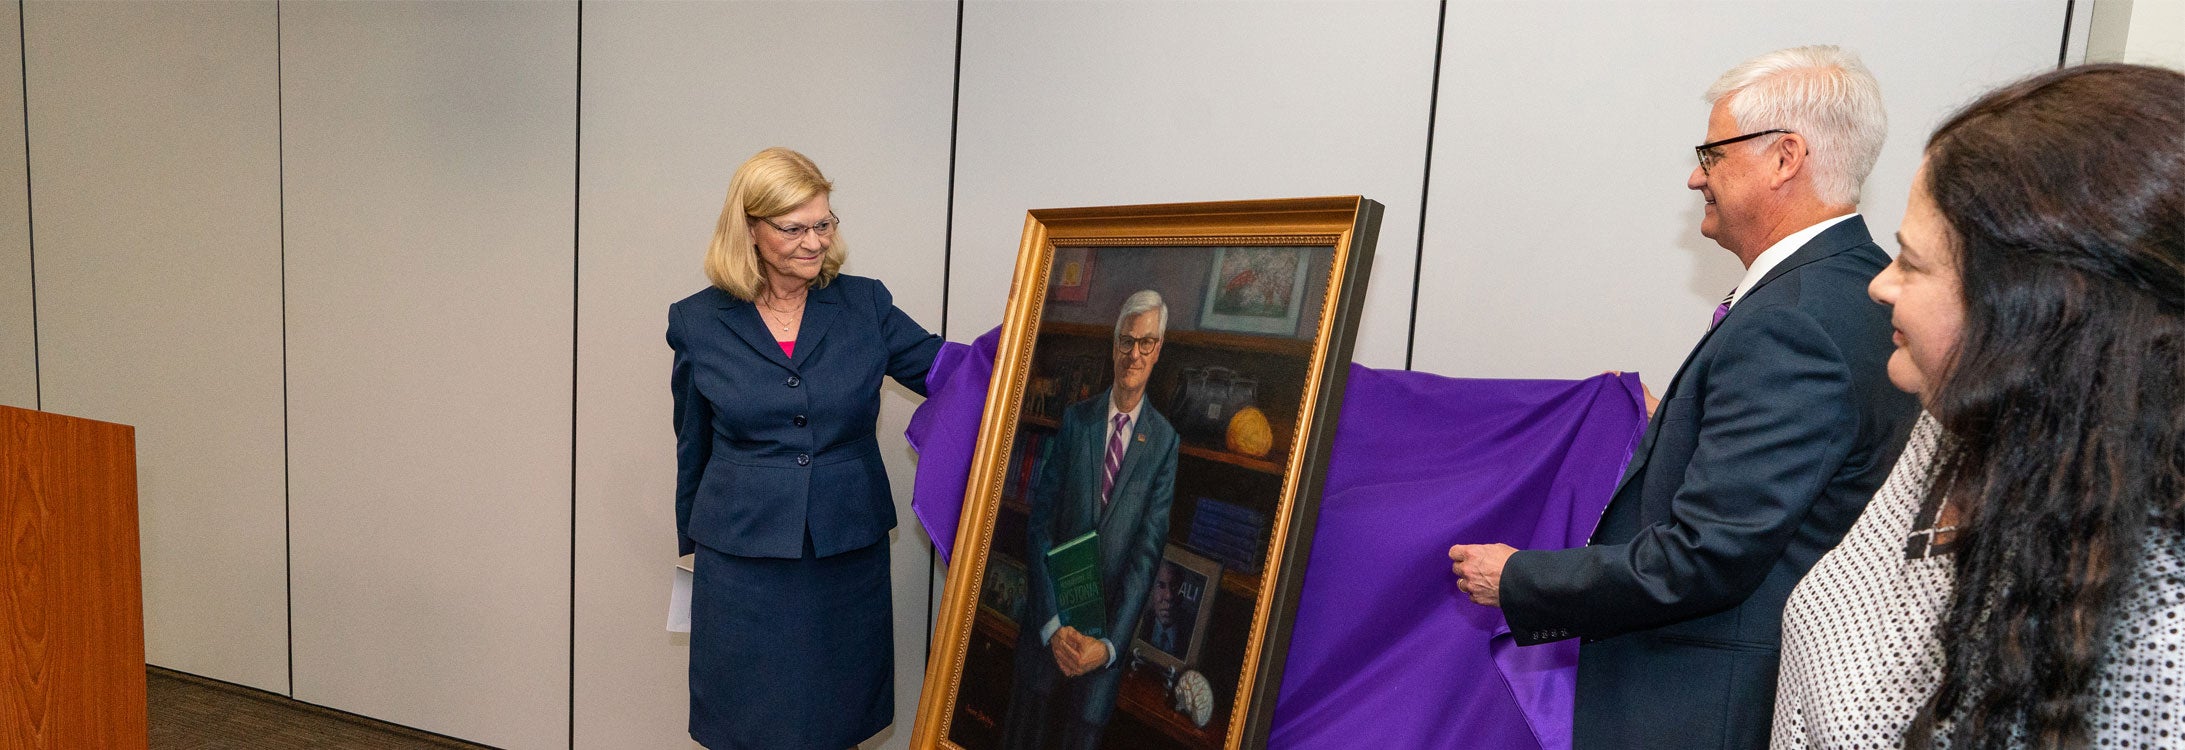 Unveiling a portrait of Dr. Mark Stacy